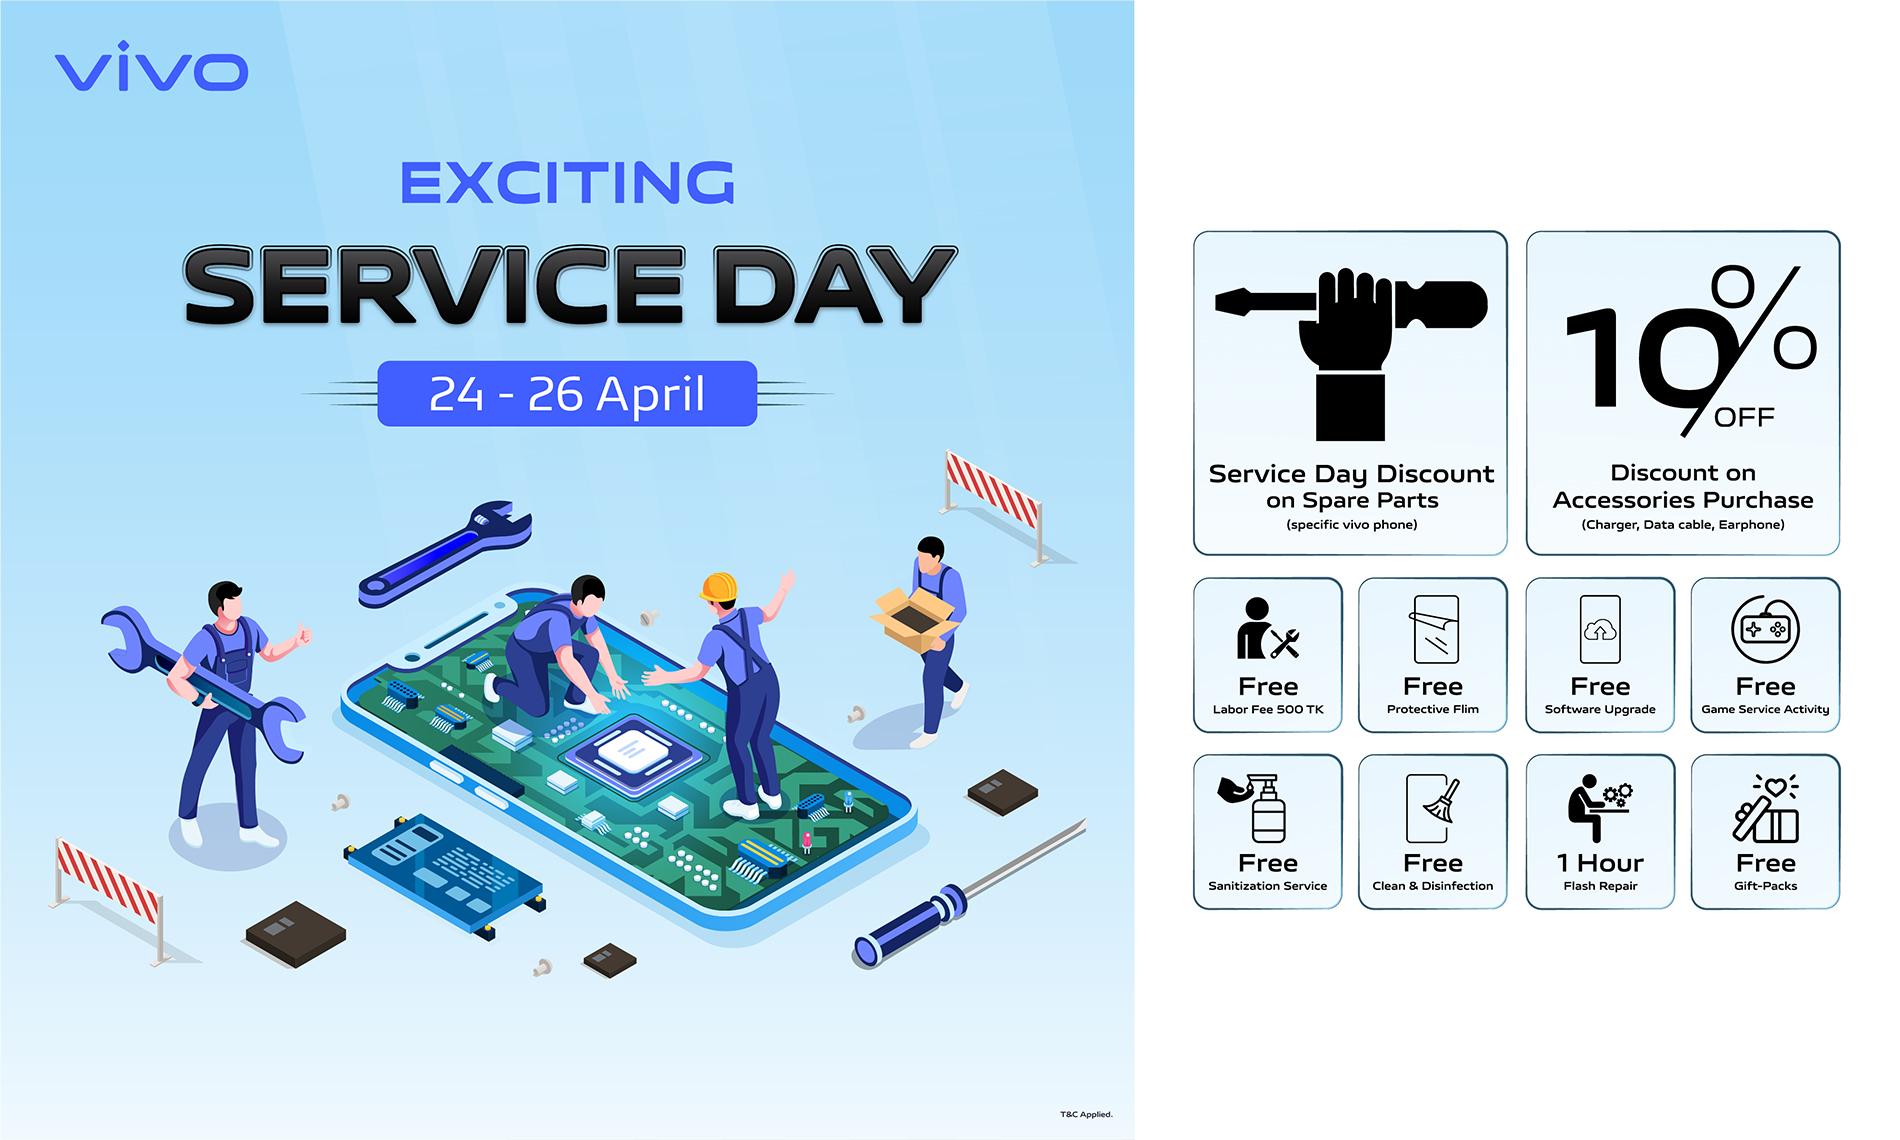 Discover Exclusive EID Offers at vivo Service Day